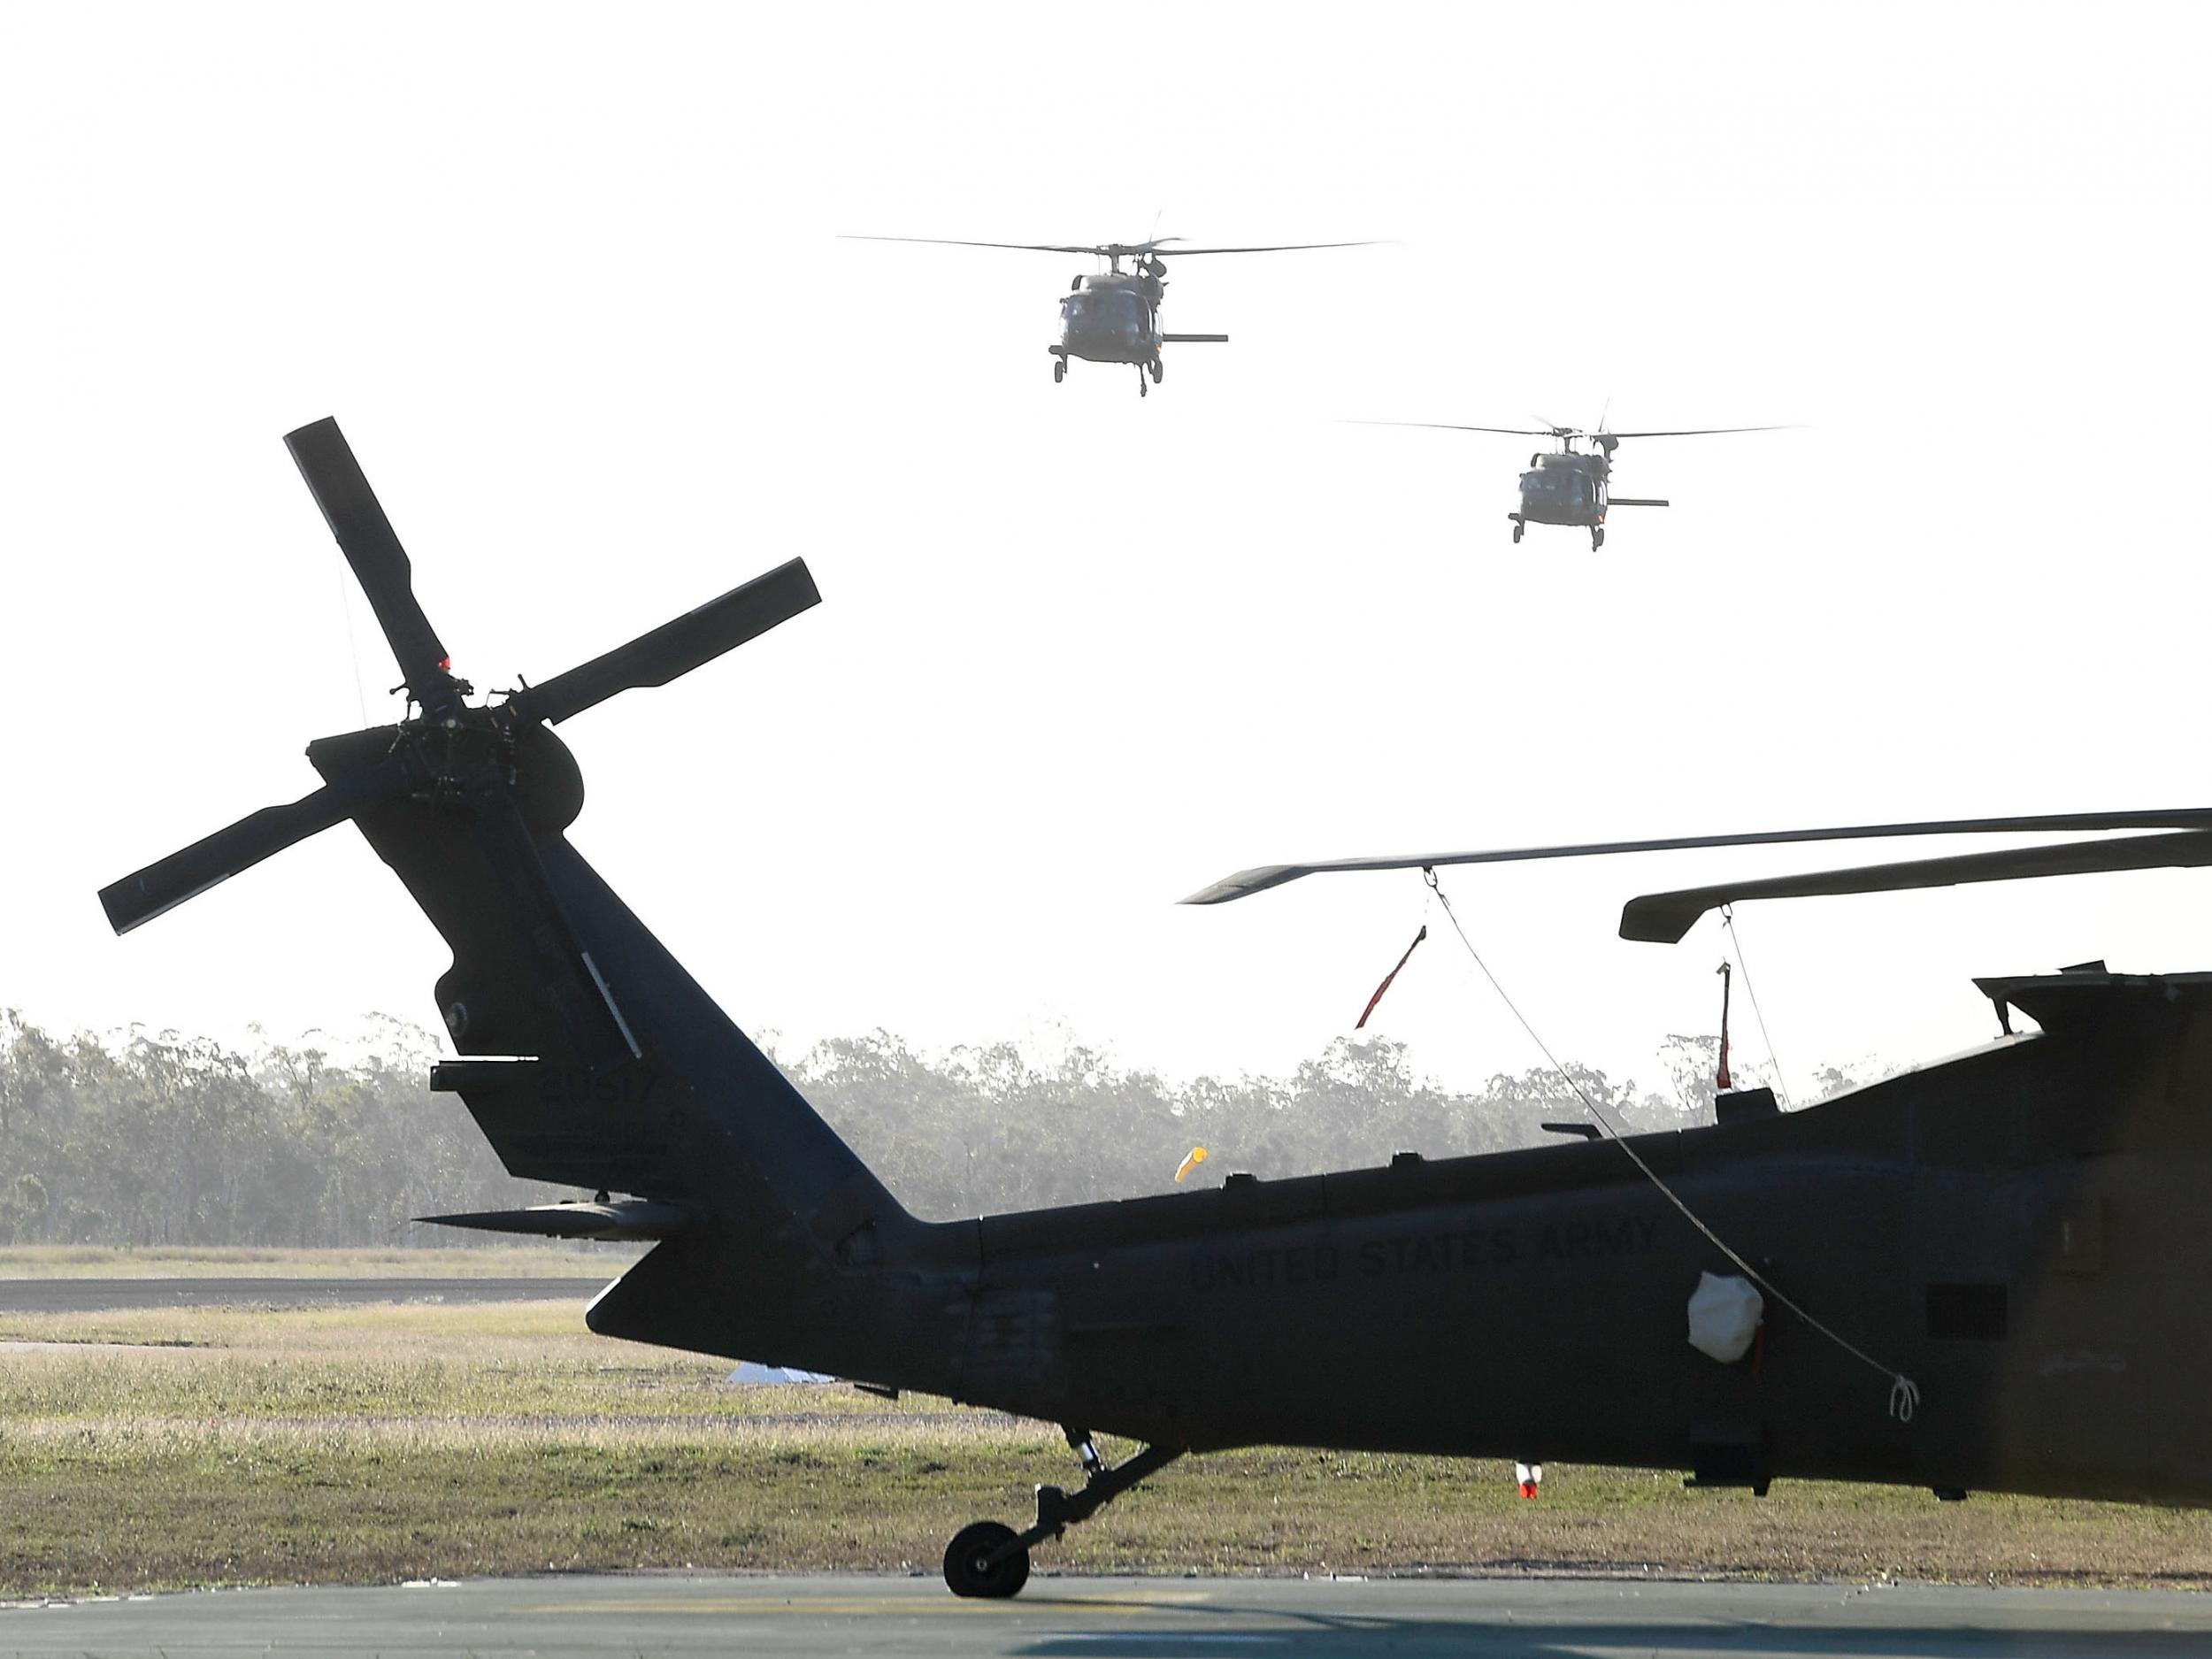 Two US army Black Hawk helicopters are seen landing